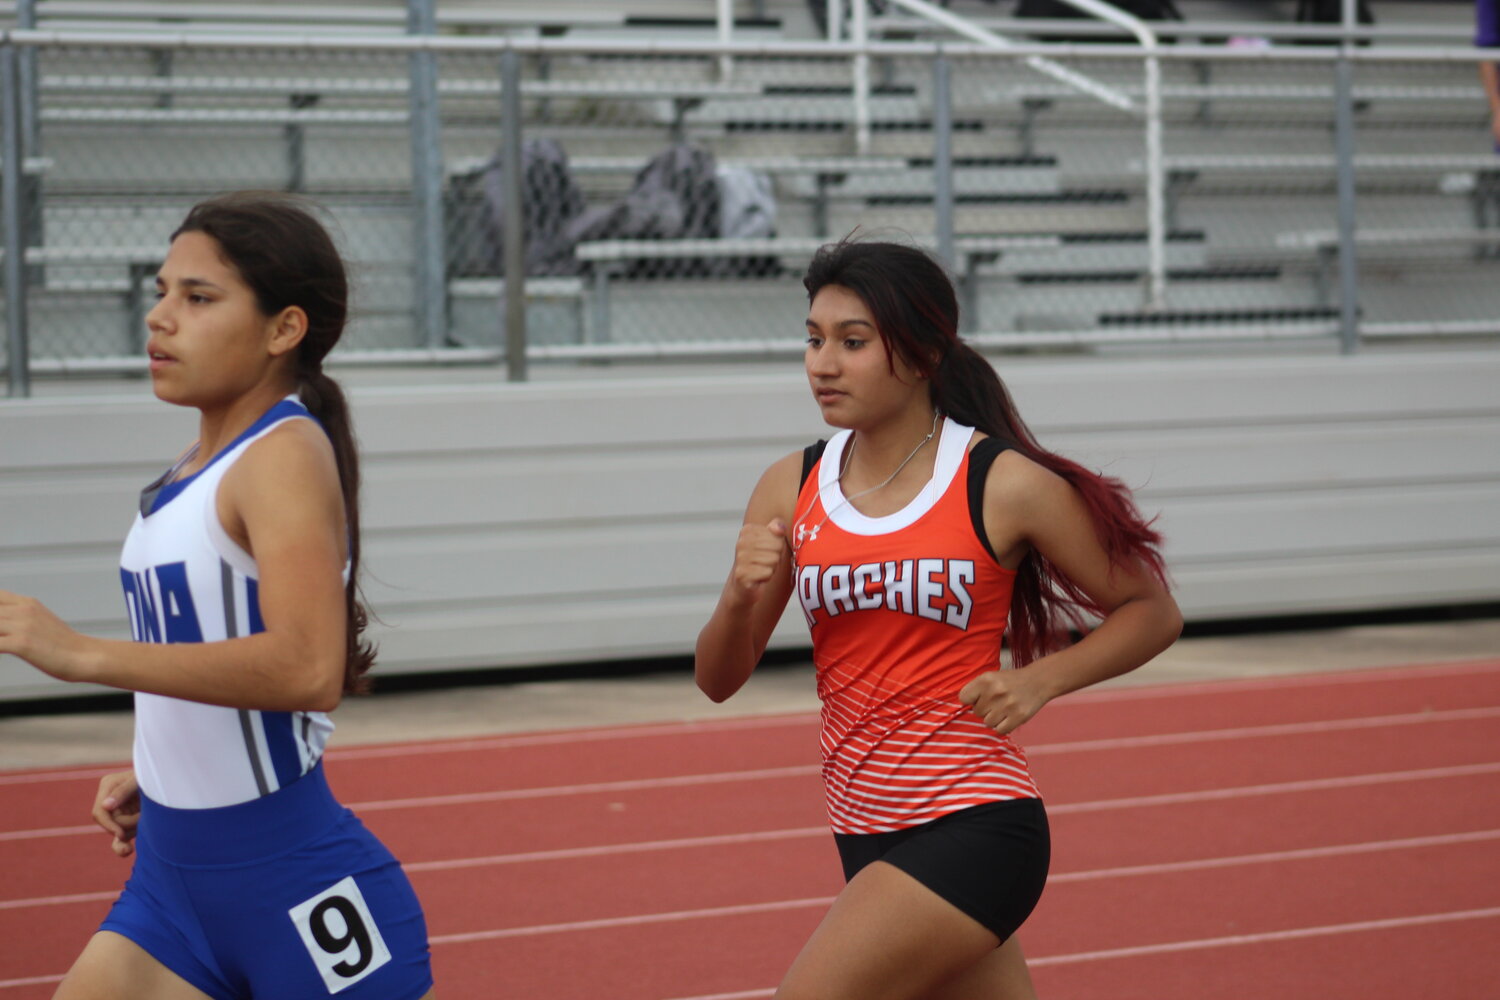 Lady Apaches’ Marianelly Martinez runs in the 1600m race at the Cuero meet.